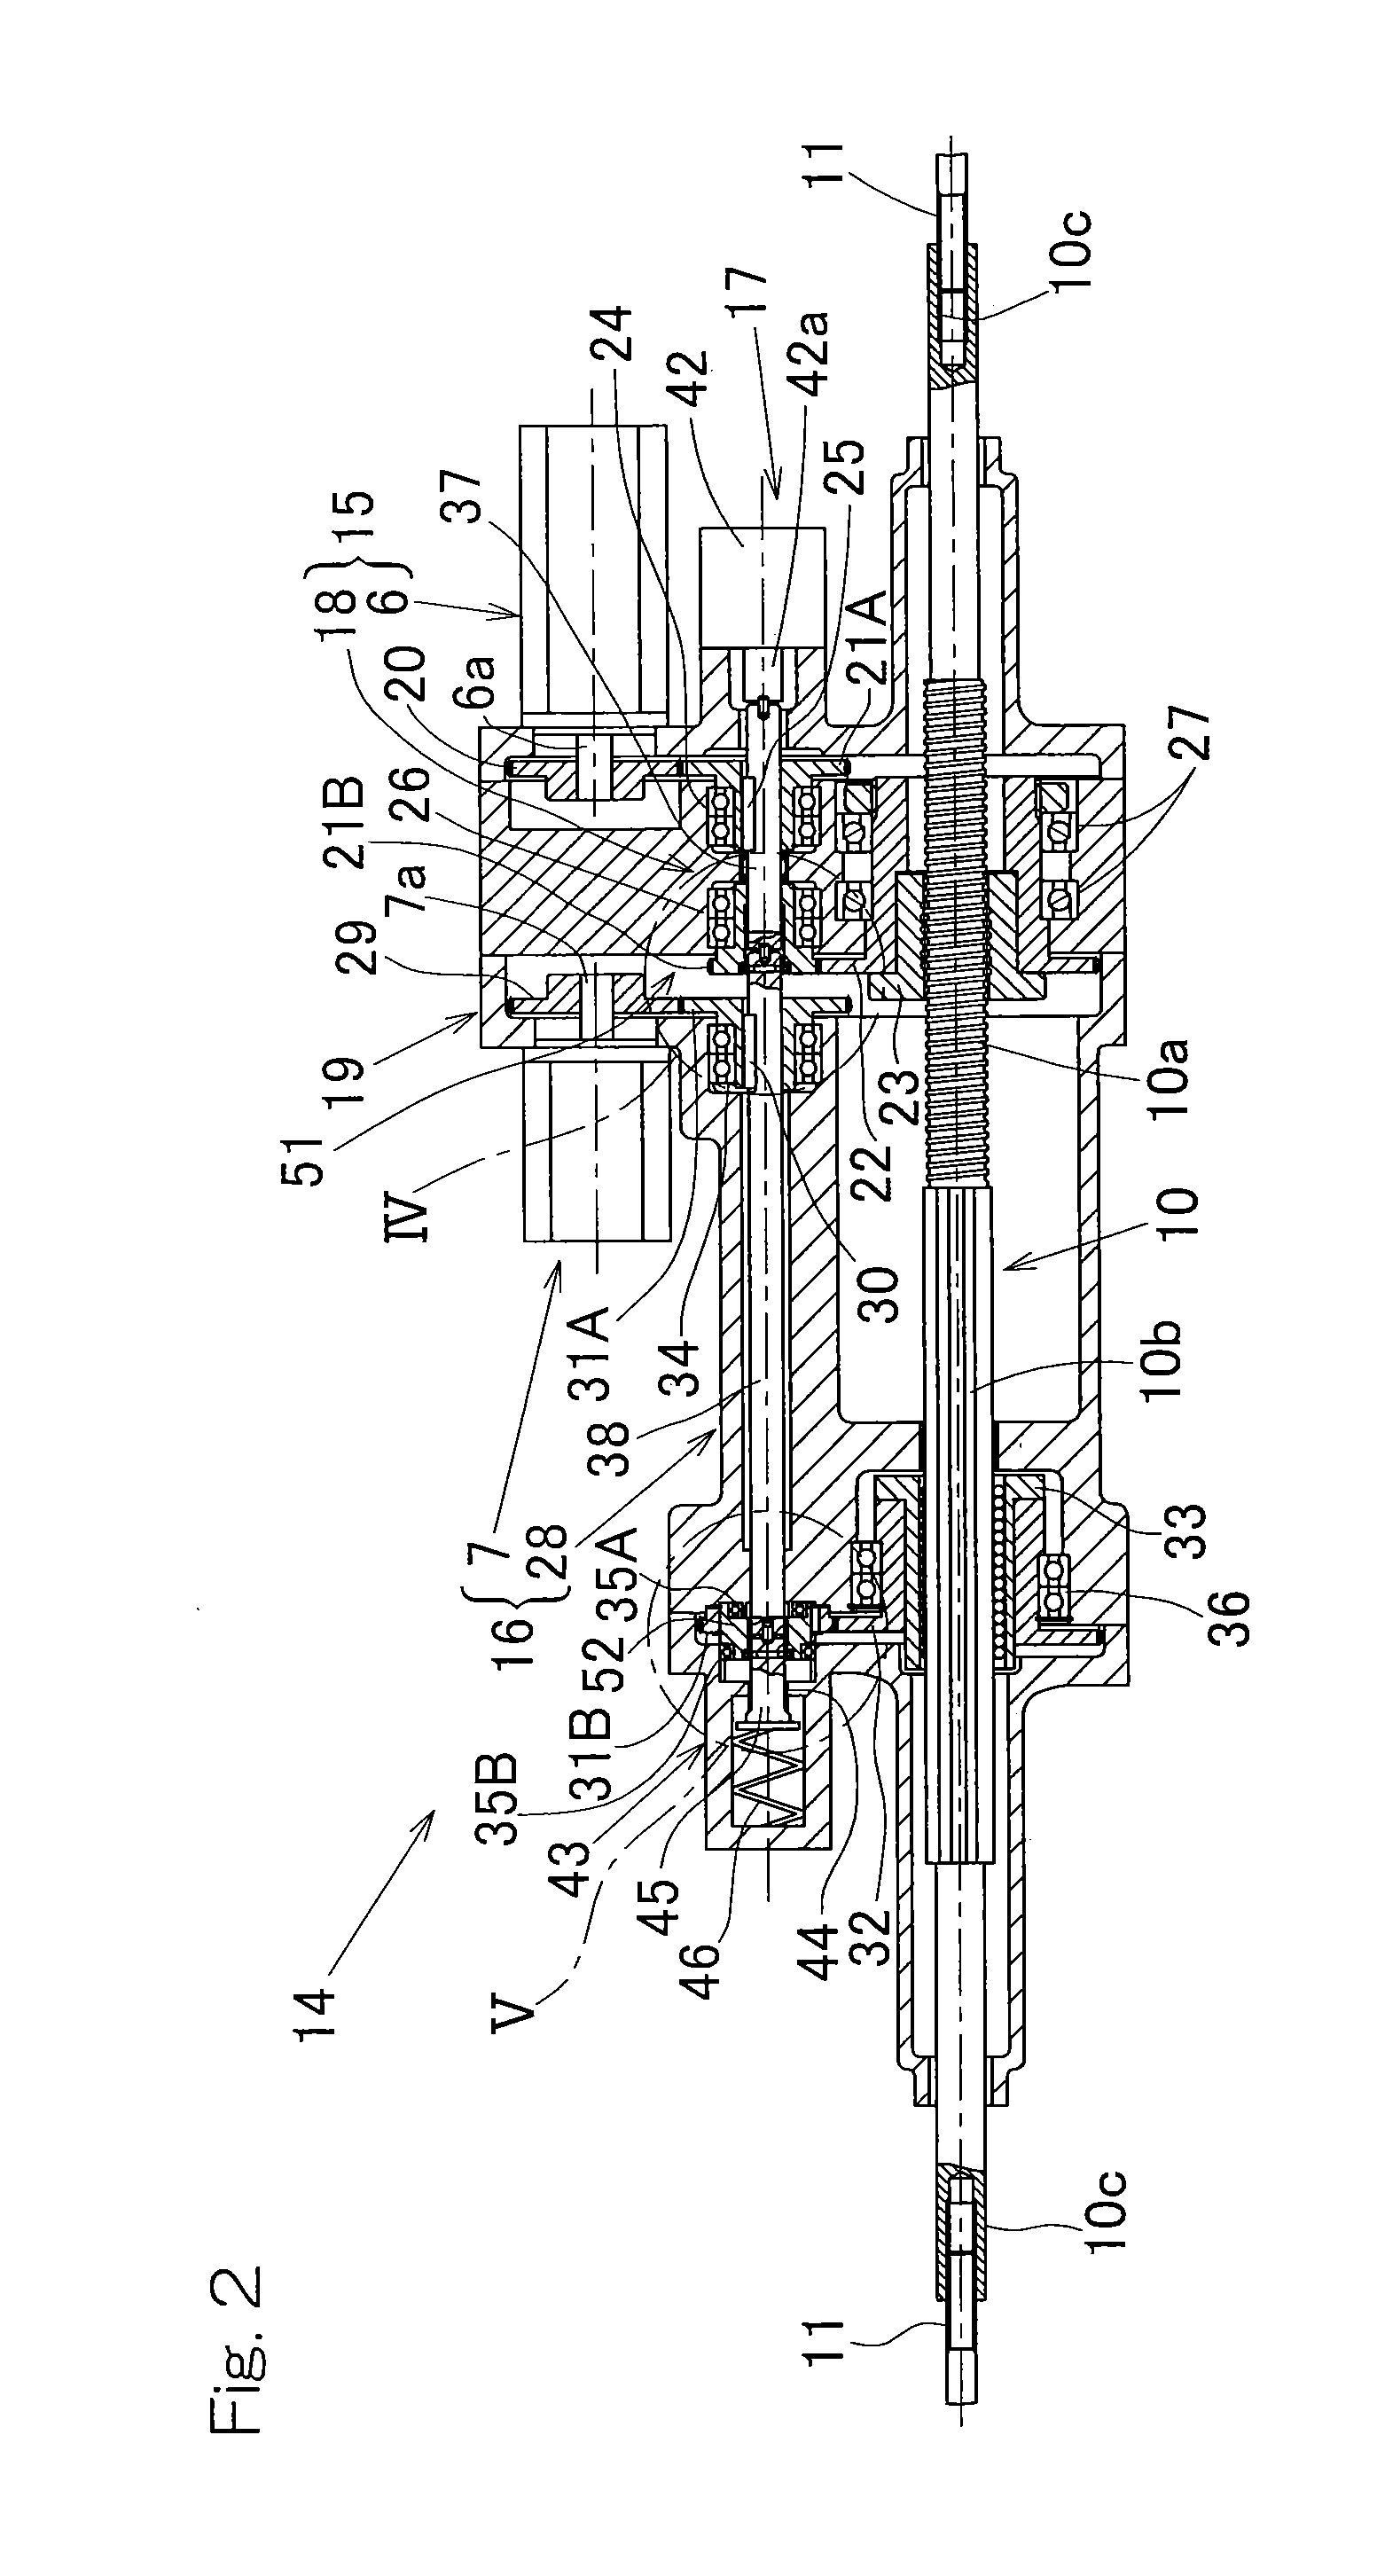 Steer-by-wire steering device